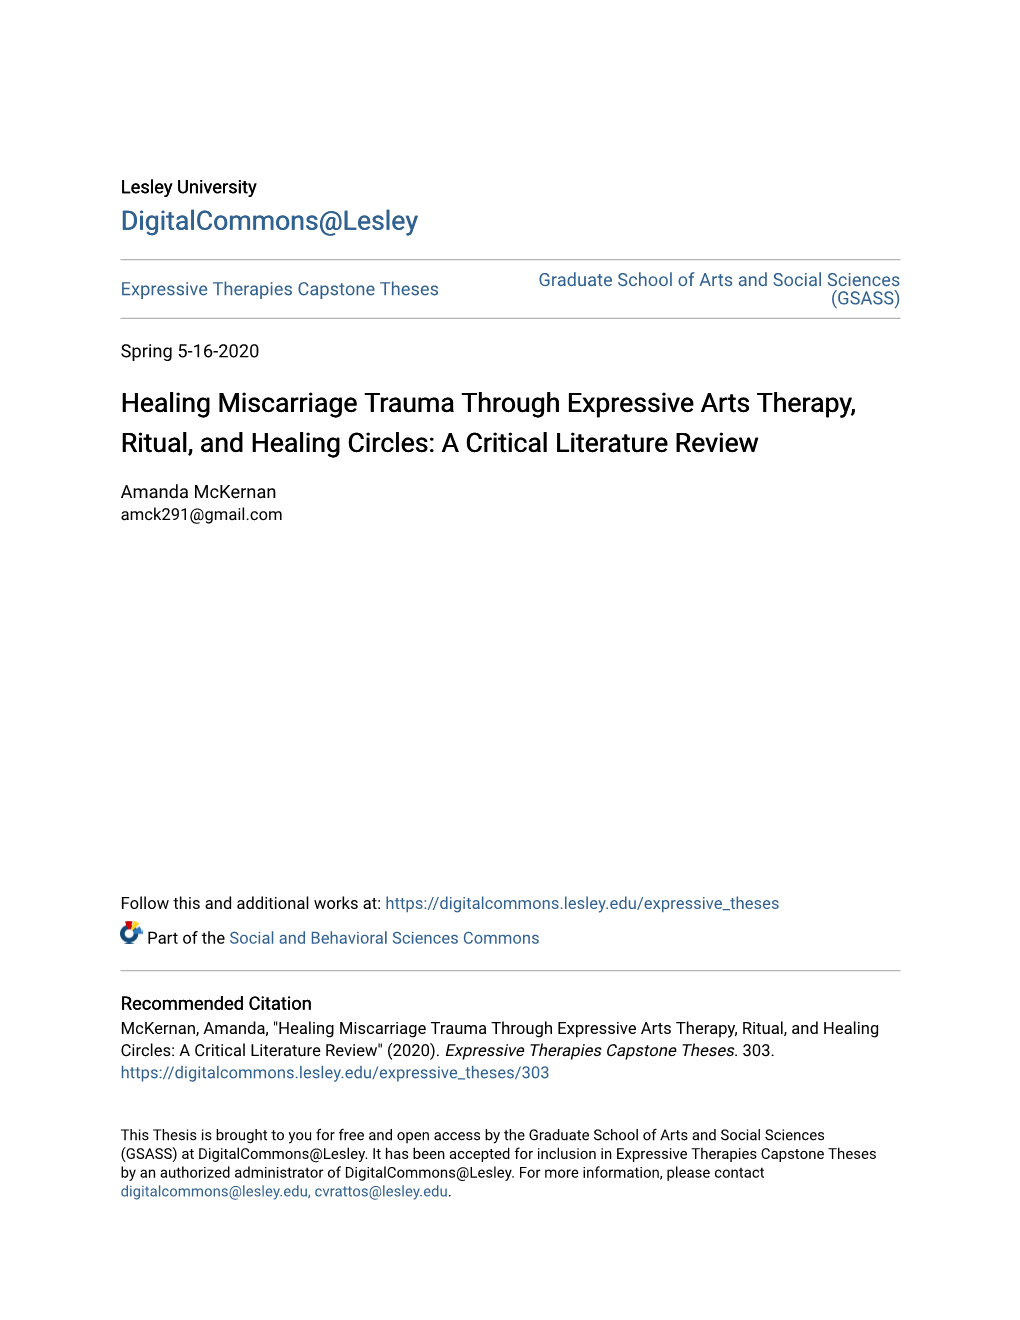 Healing Miscarriage Trauma Through Expressive Arts Therapy, Ritual, and Healing Circles: a Critical Literature Review